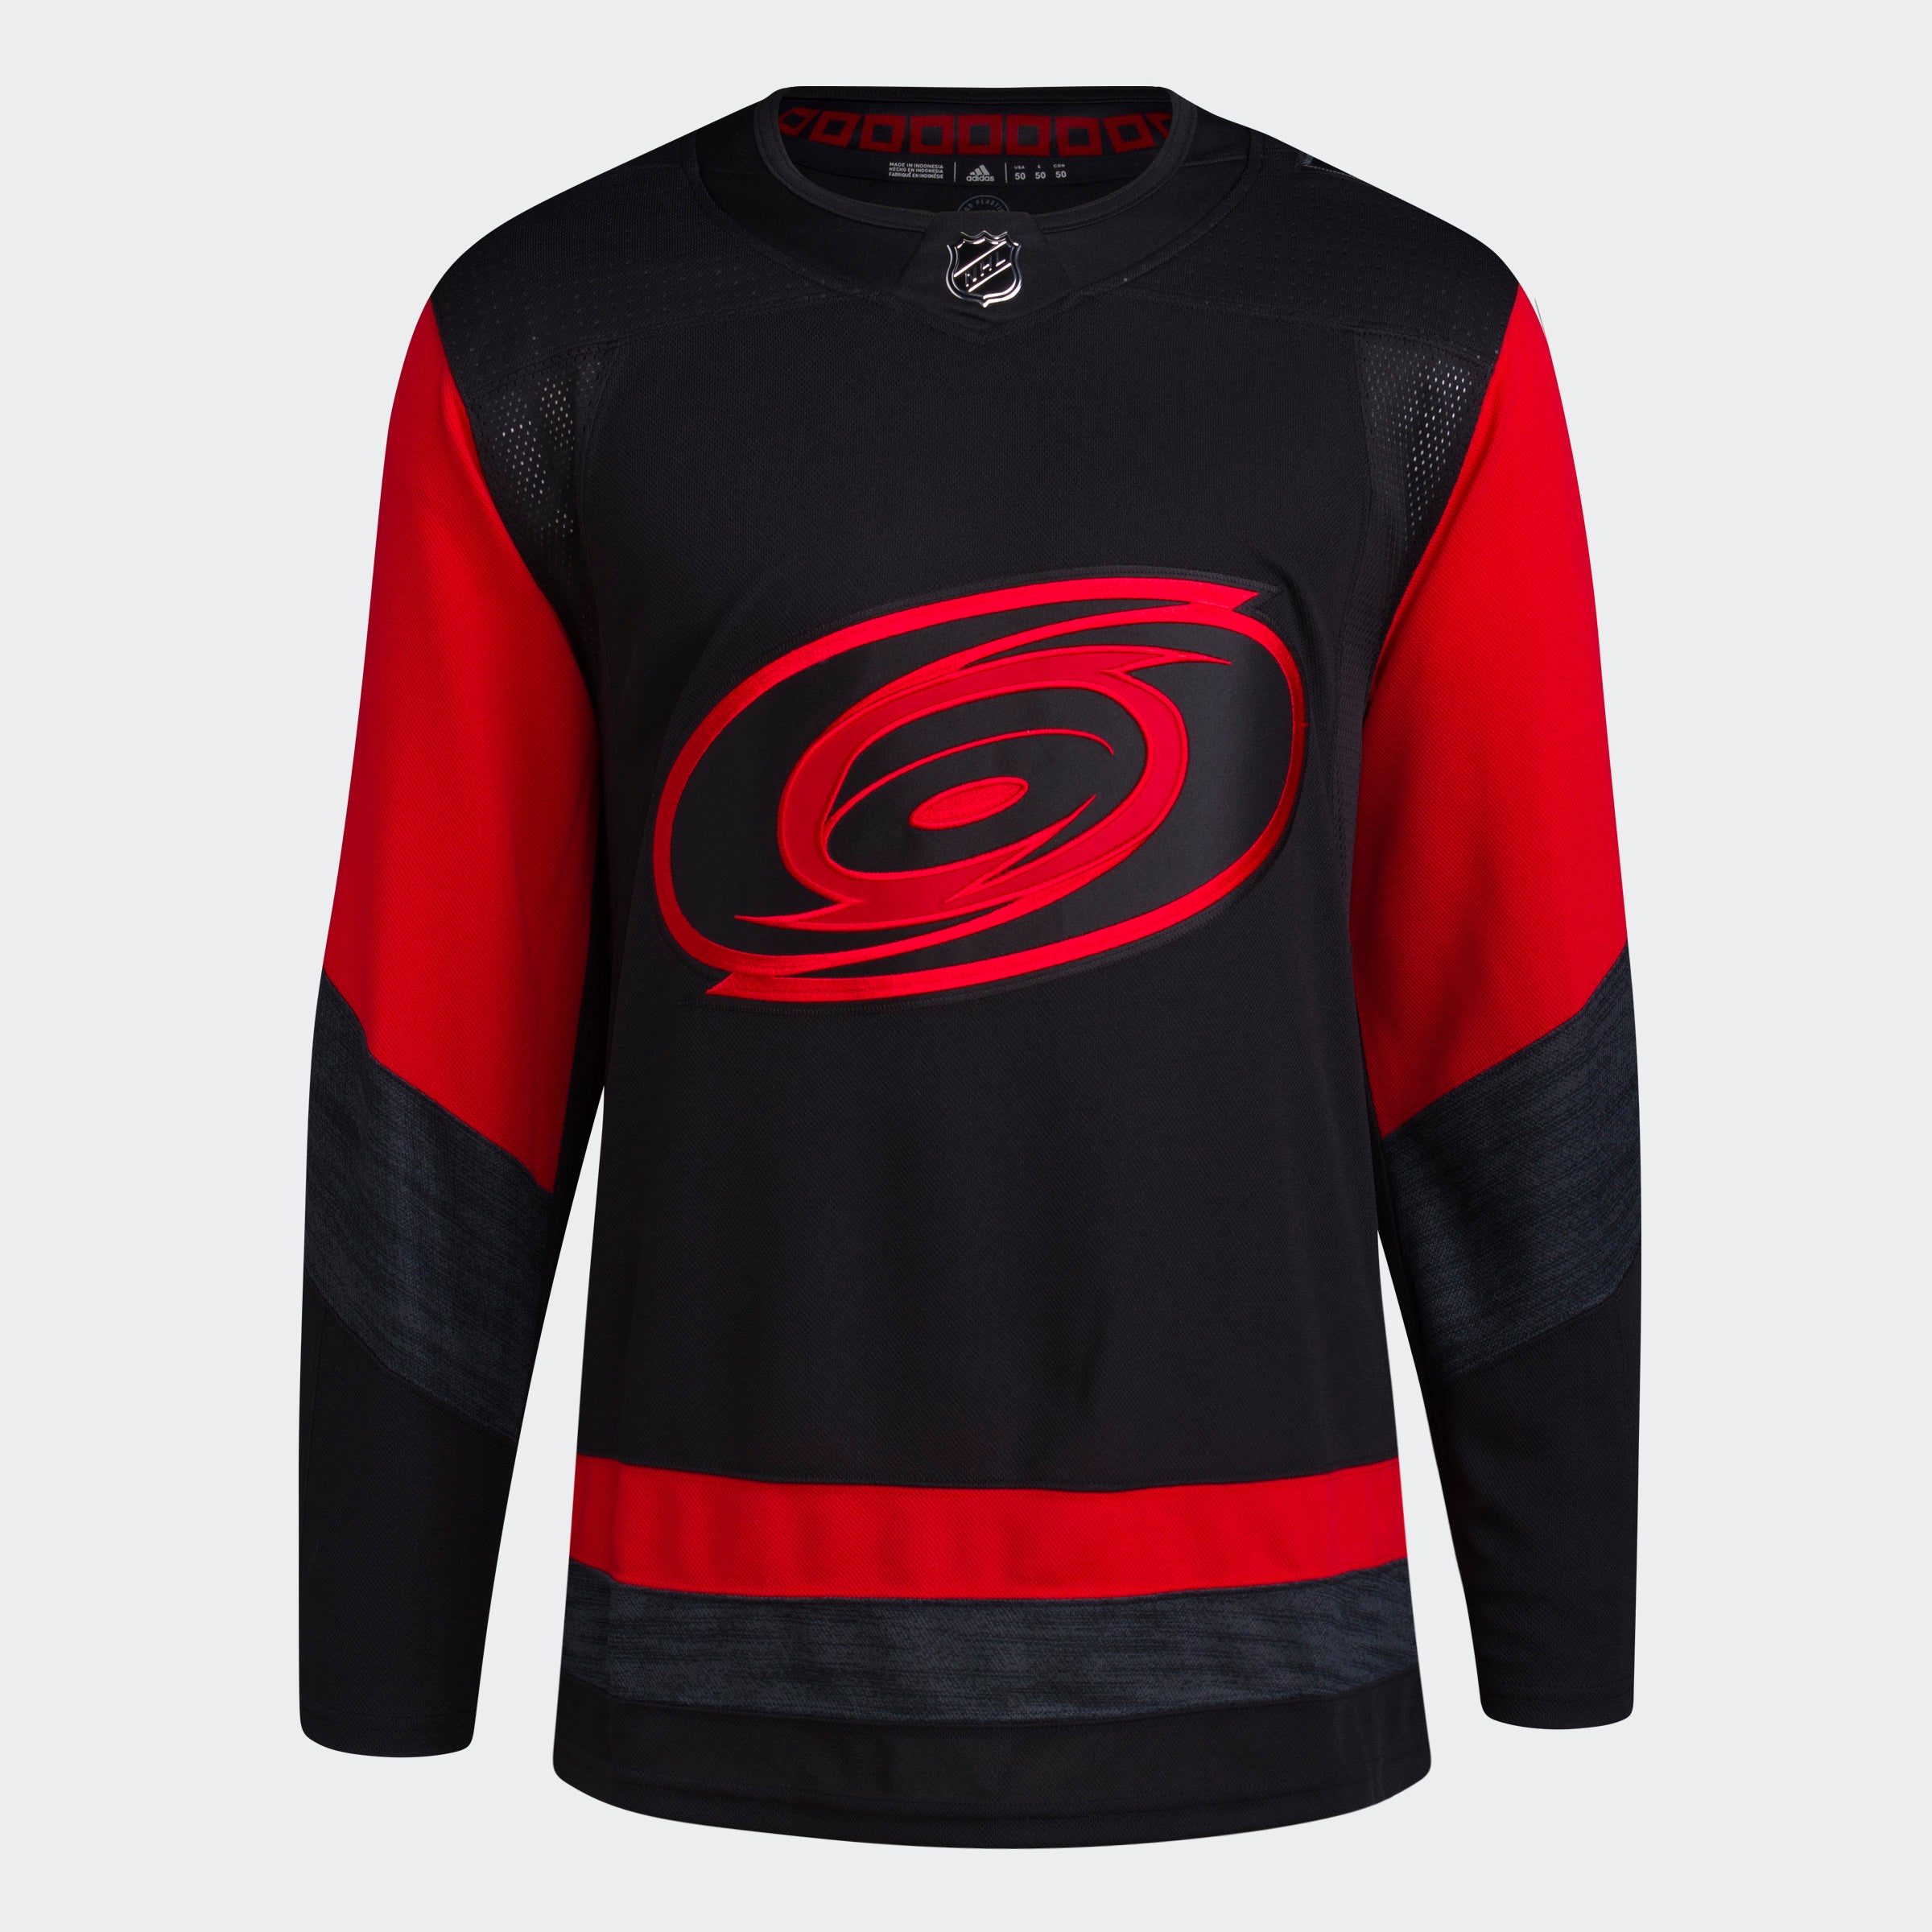 Introducing our 2022 Stadium Series jersey. Available for preorder